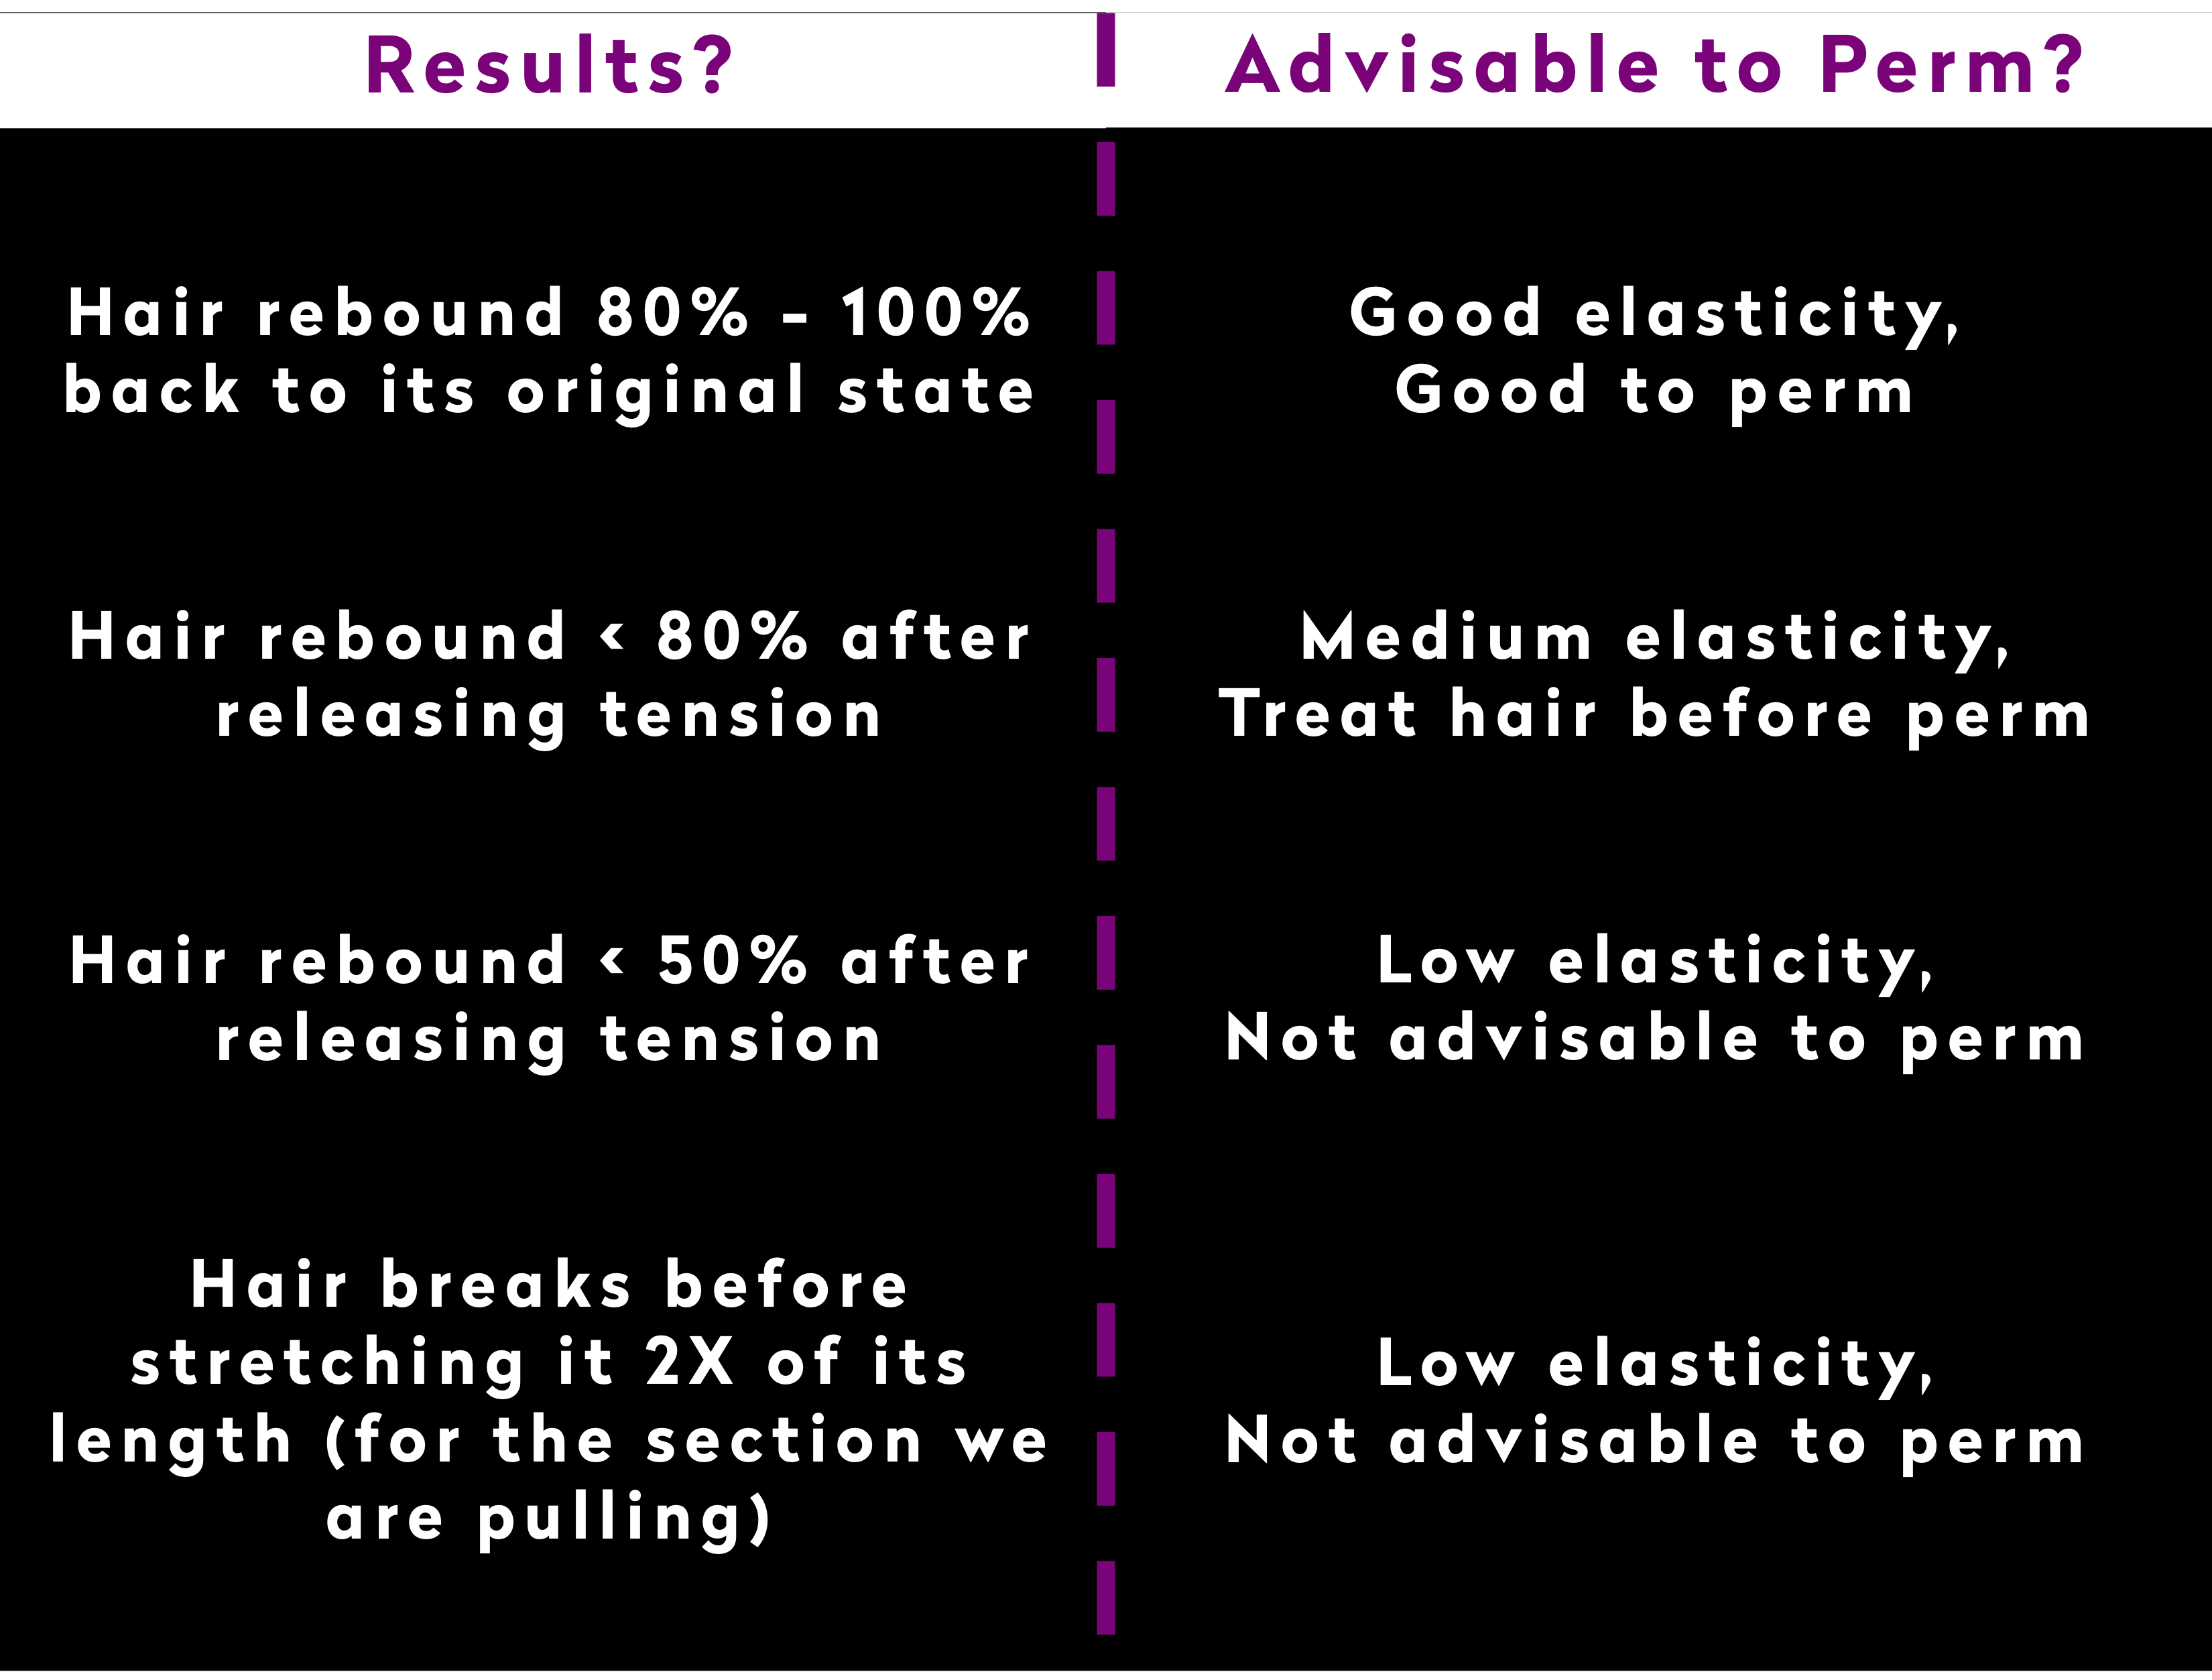 Key factors that determines whether a hair can be permed or not is elasticity